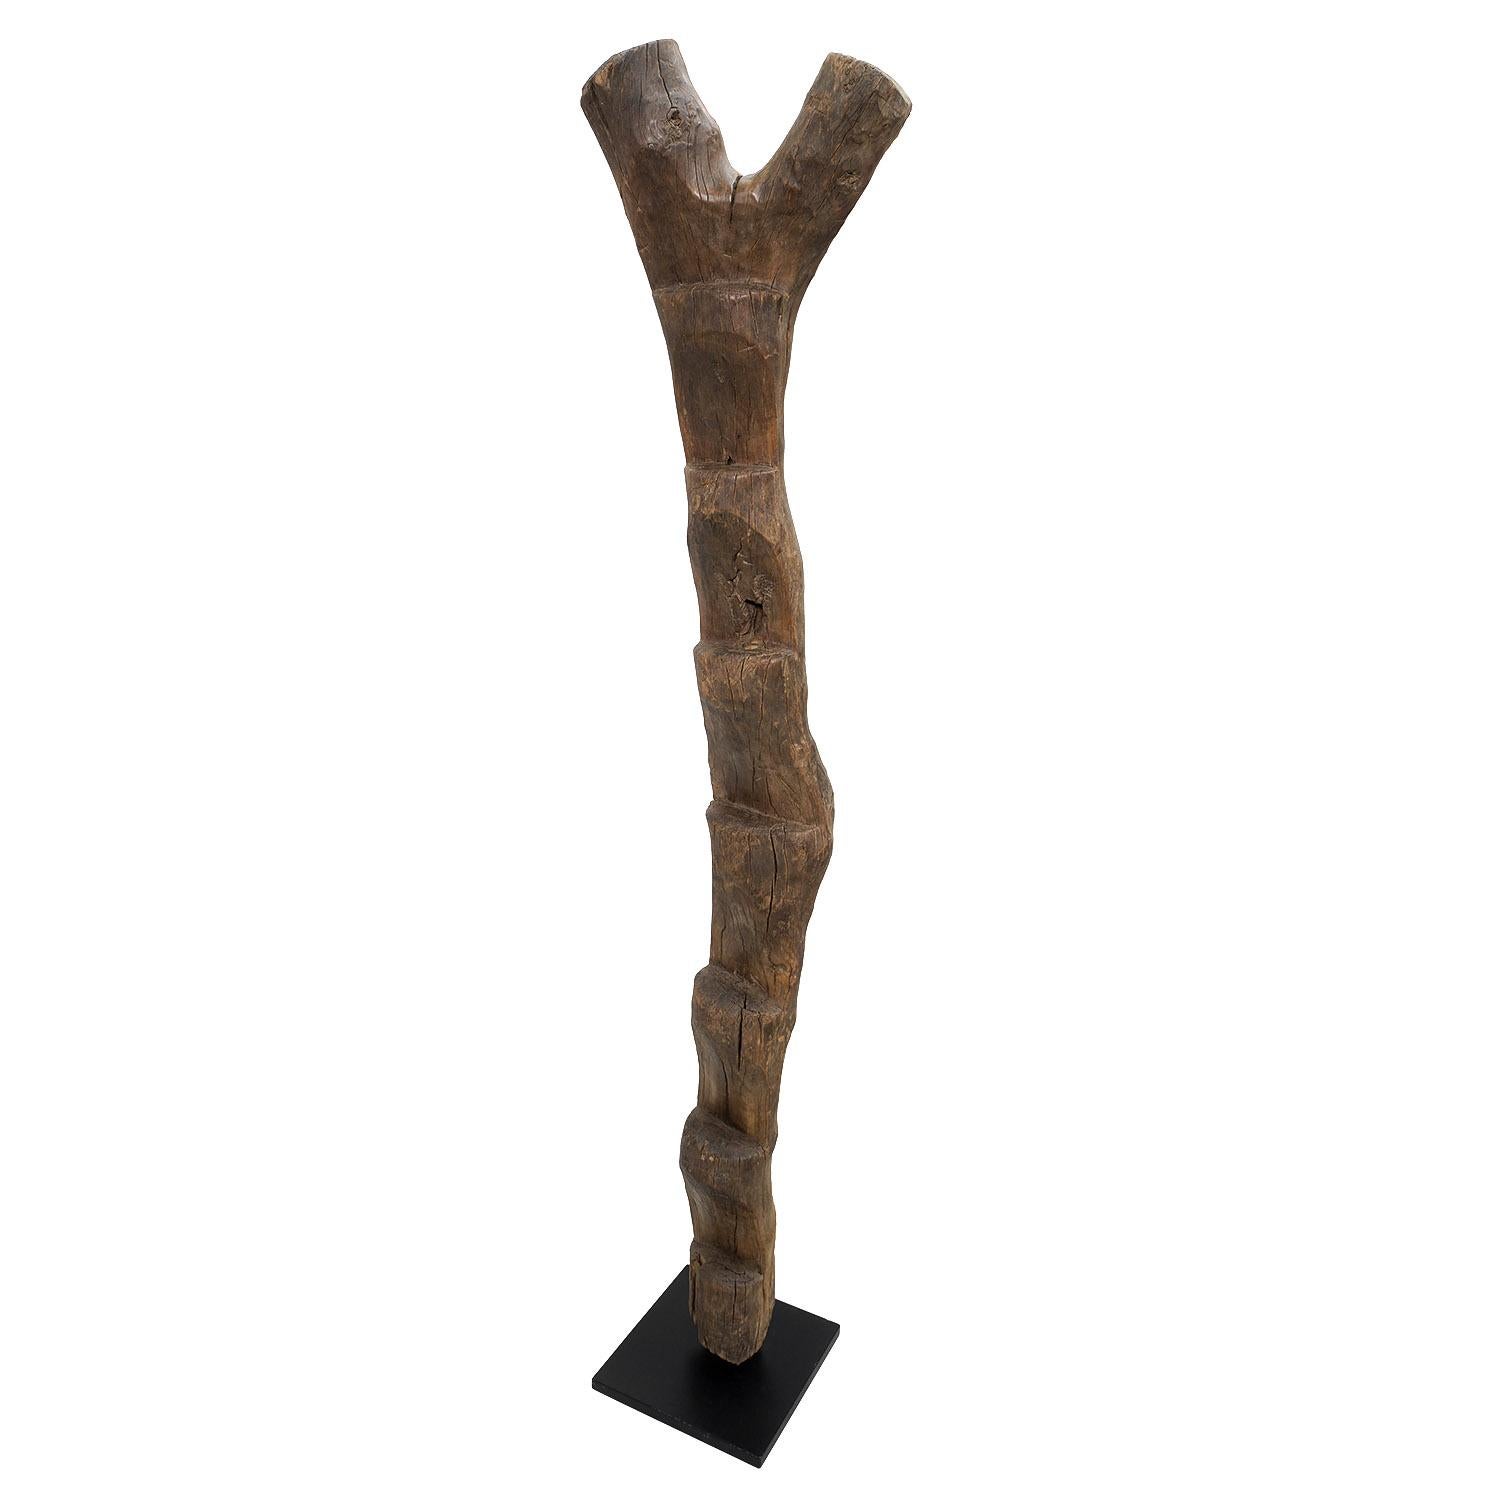 Large Dogon ladder, Mali

Wood

Early to mid-20th century

Measures: 75.5 x 16 in. / 192 x 41 cm

With a textured, eroded patina, this ladder was originally used outdoors. Carved from a naturally forked tree, indoor versions wear to a smooth